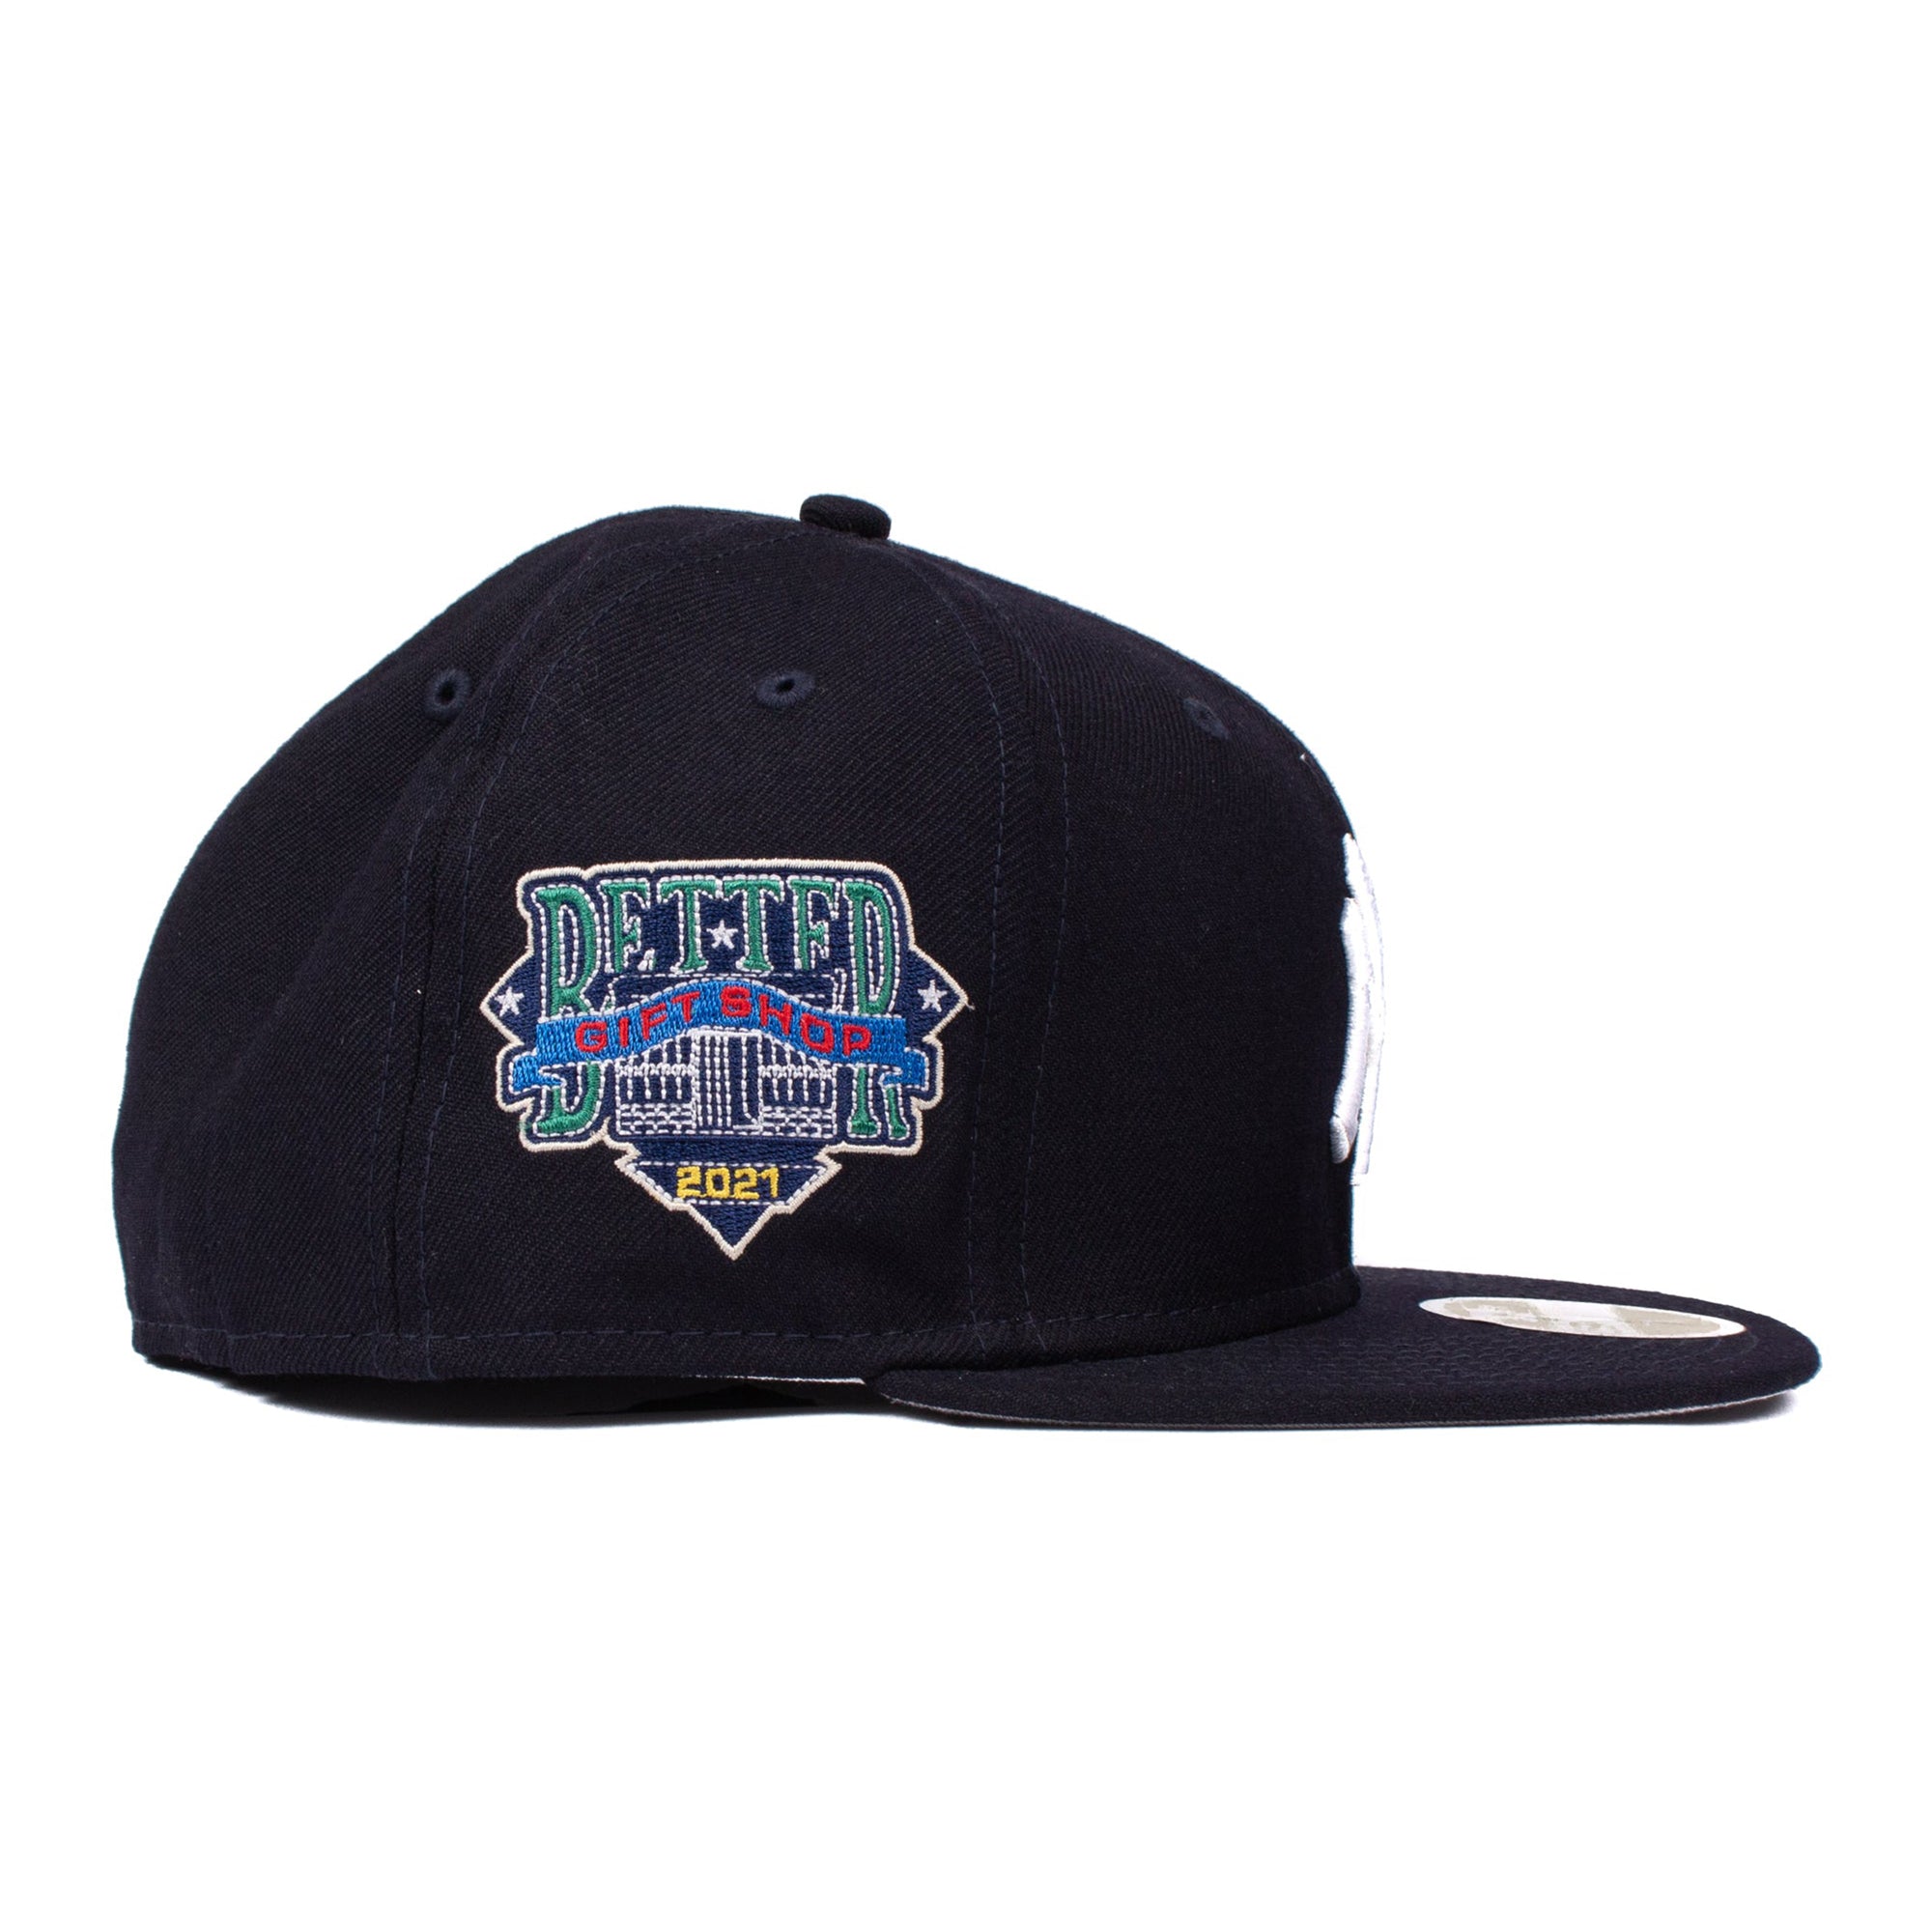 Better Gift Shop - MLB Yankees New Era Fitted - (Navy)